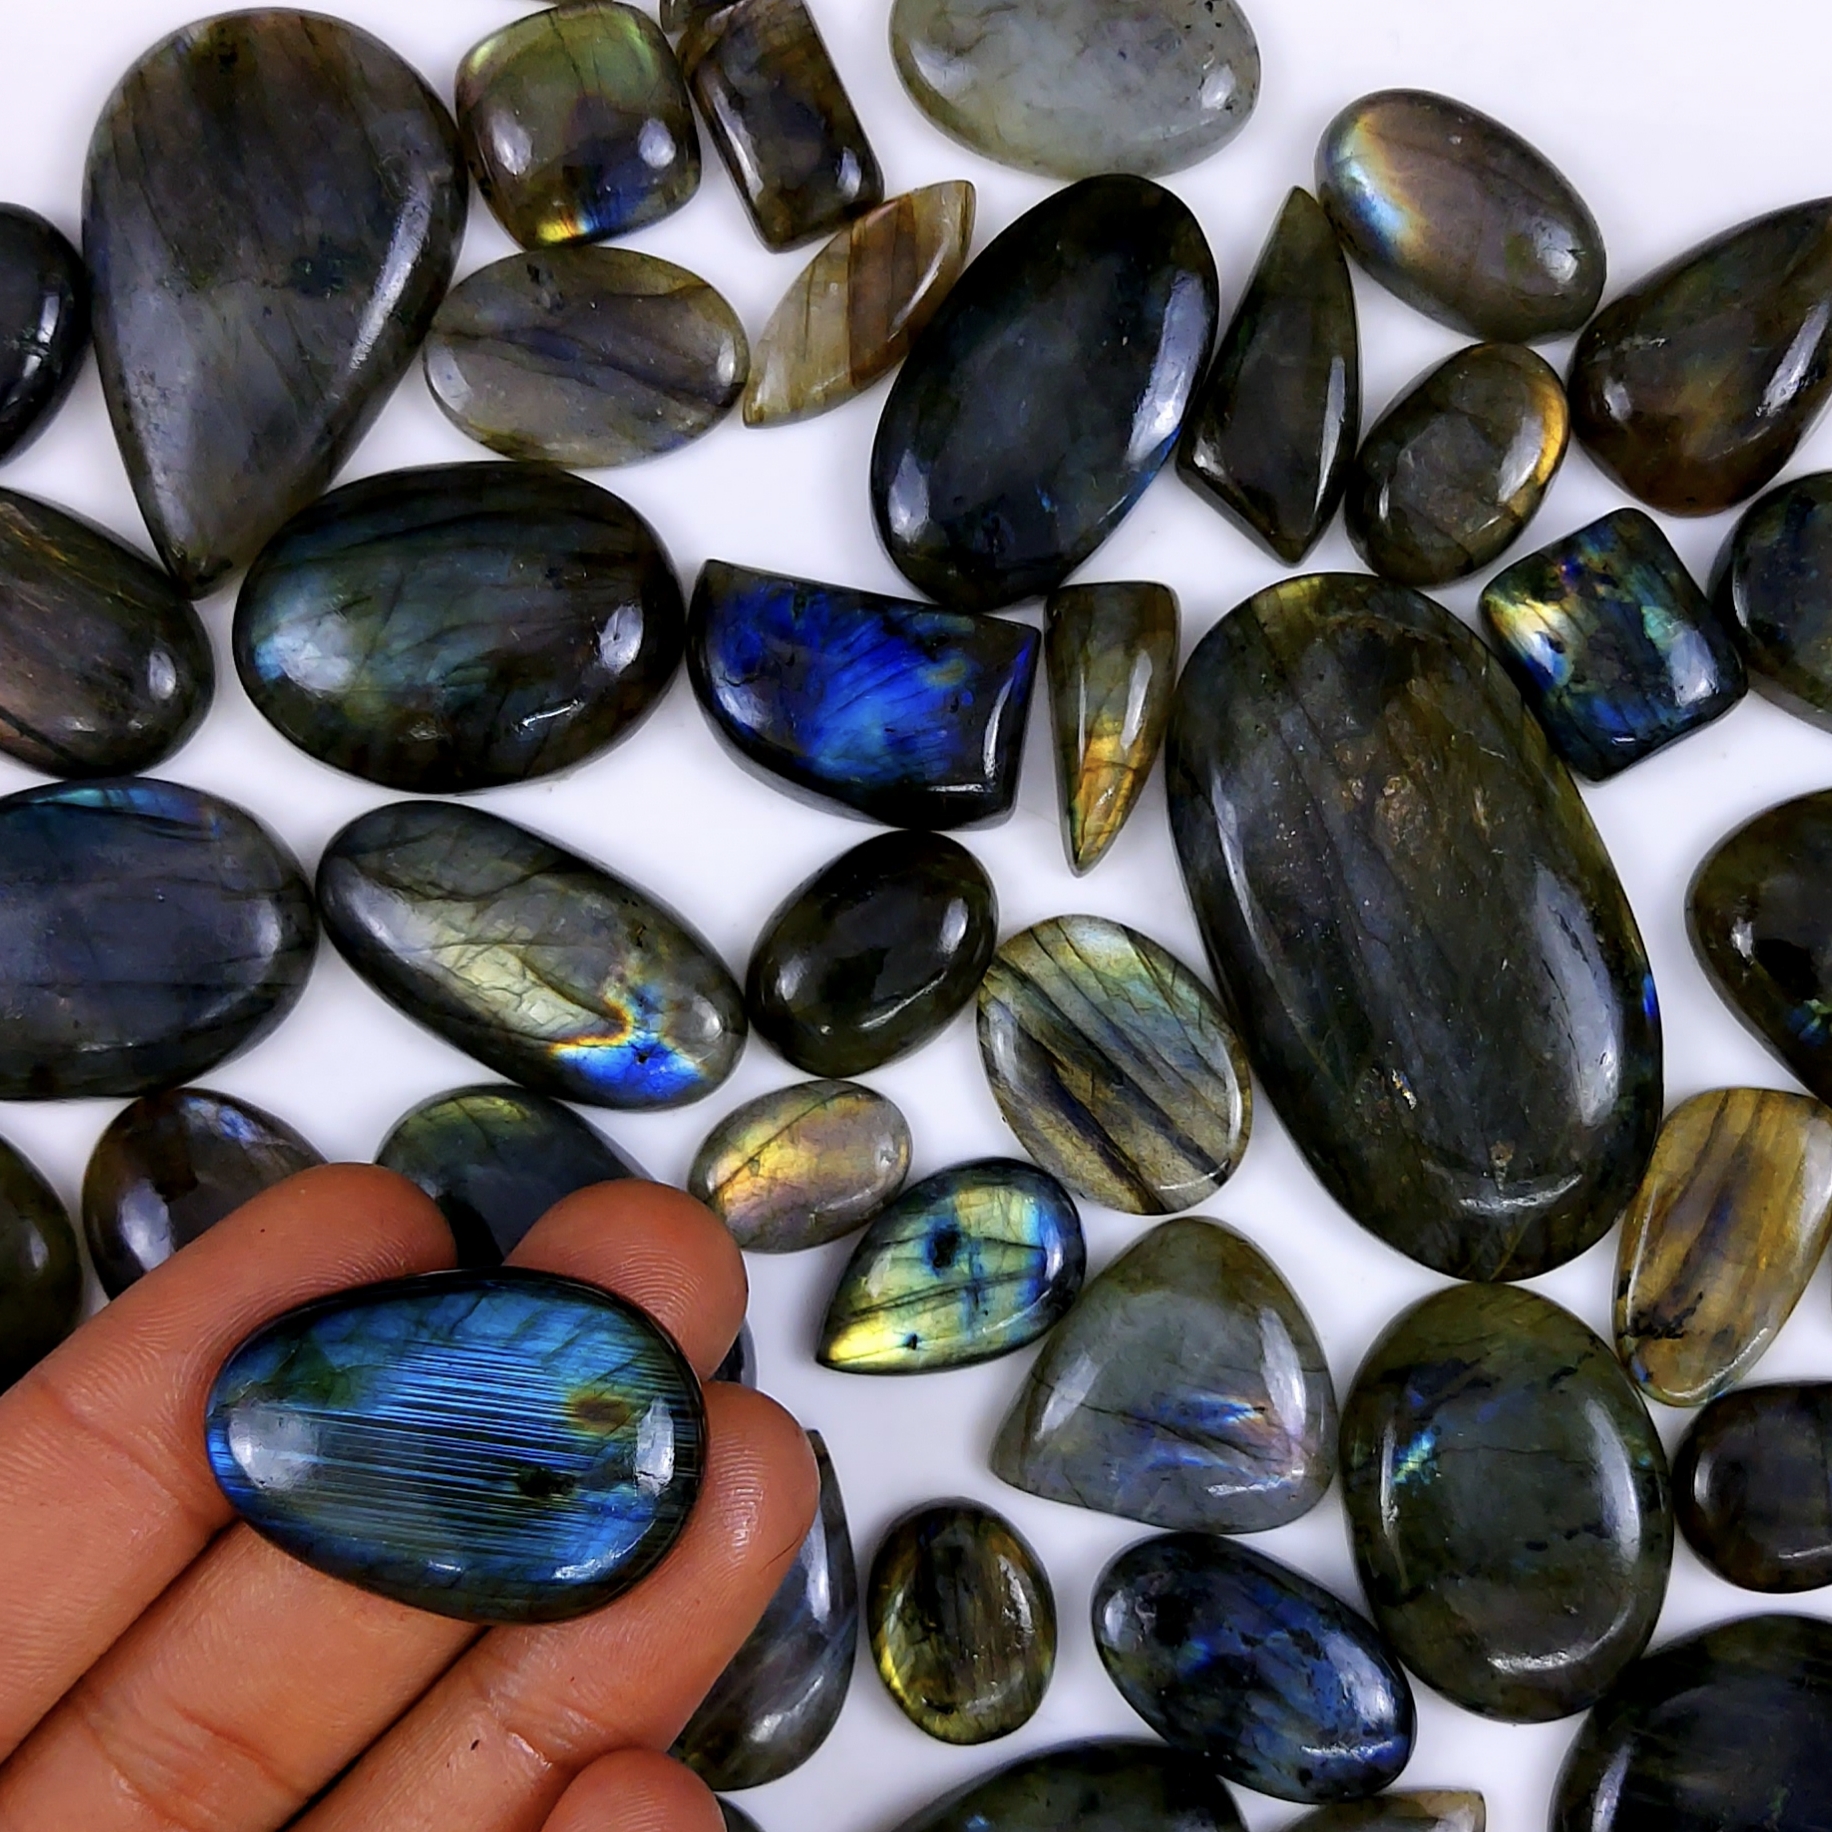 56pc 1681Cts Labradorite Cabochon Multifire Healing Crystal For Jewelry Supplies, Labradorite Necklace Handmade Wire Wrapped Gemstone Pendant 45x30 15x13mm#6359